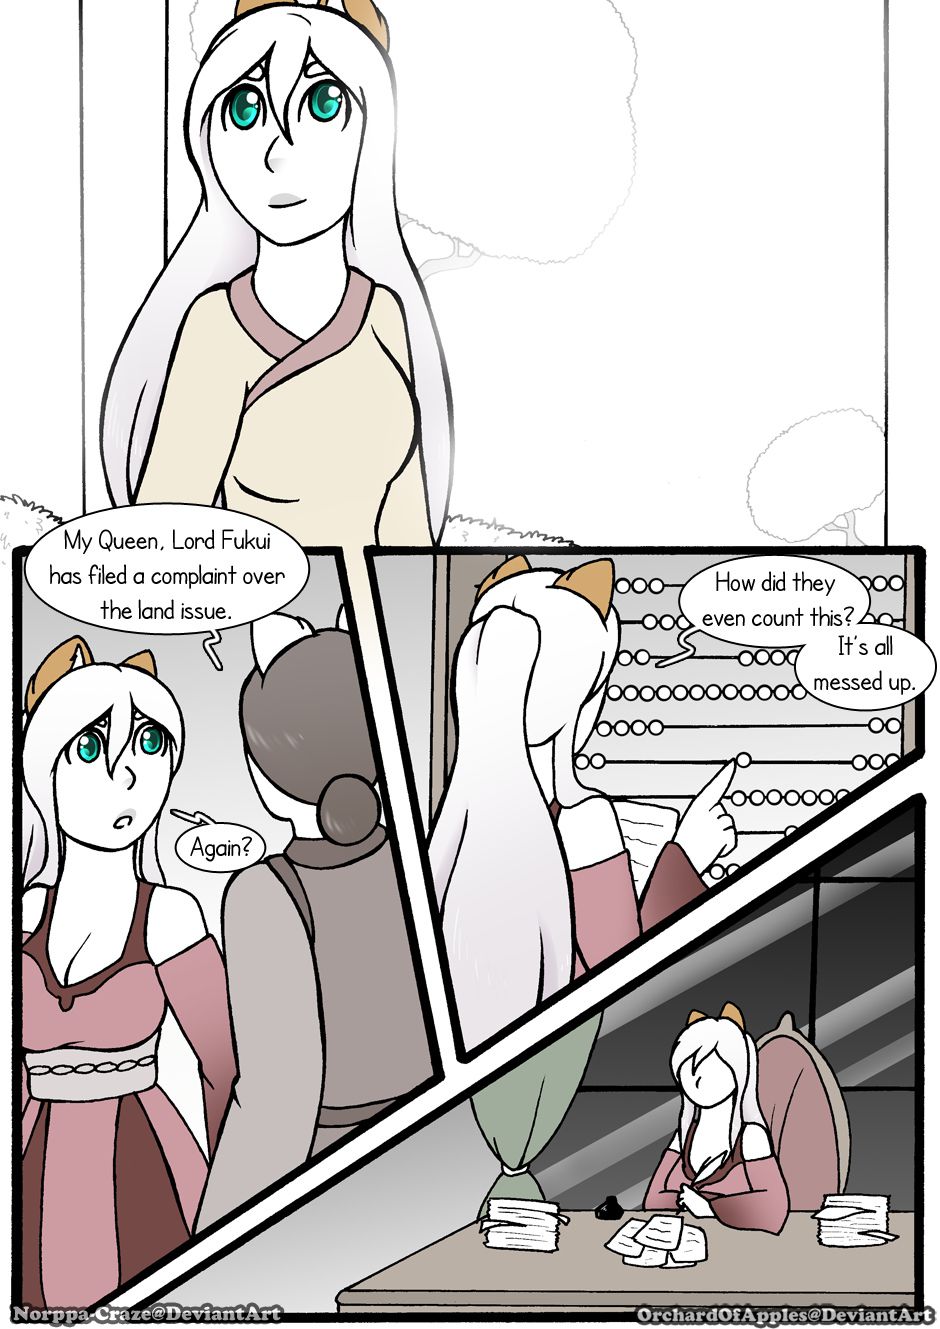 [Jeny-jen94] Between Kings and Queens [Ongoing] 322